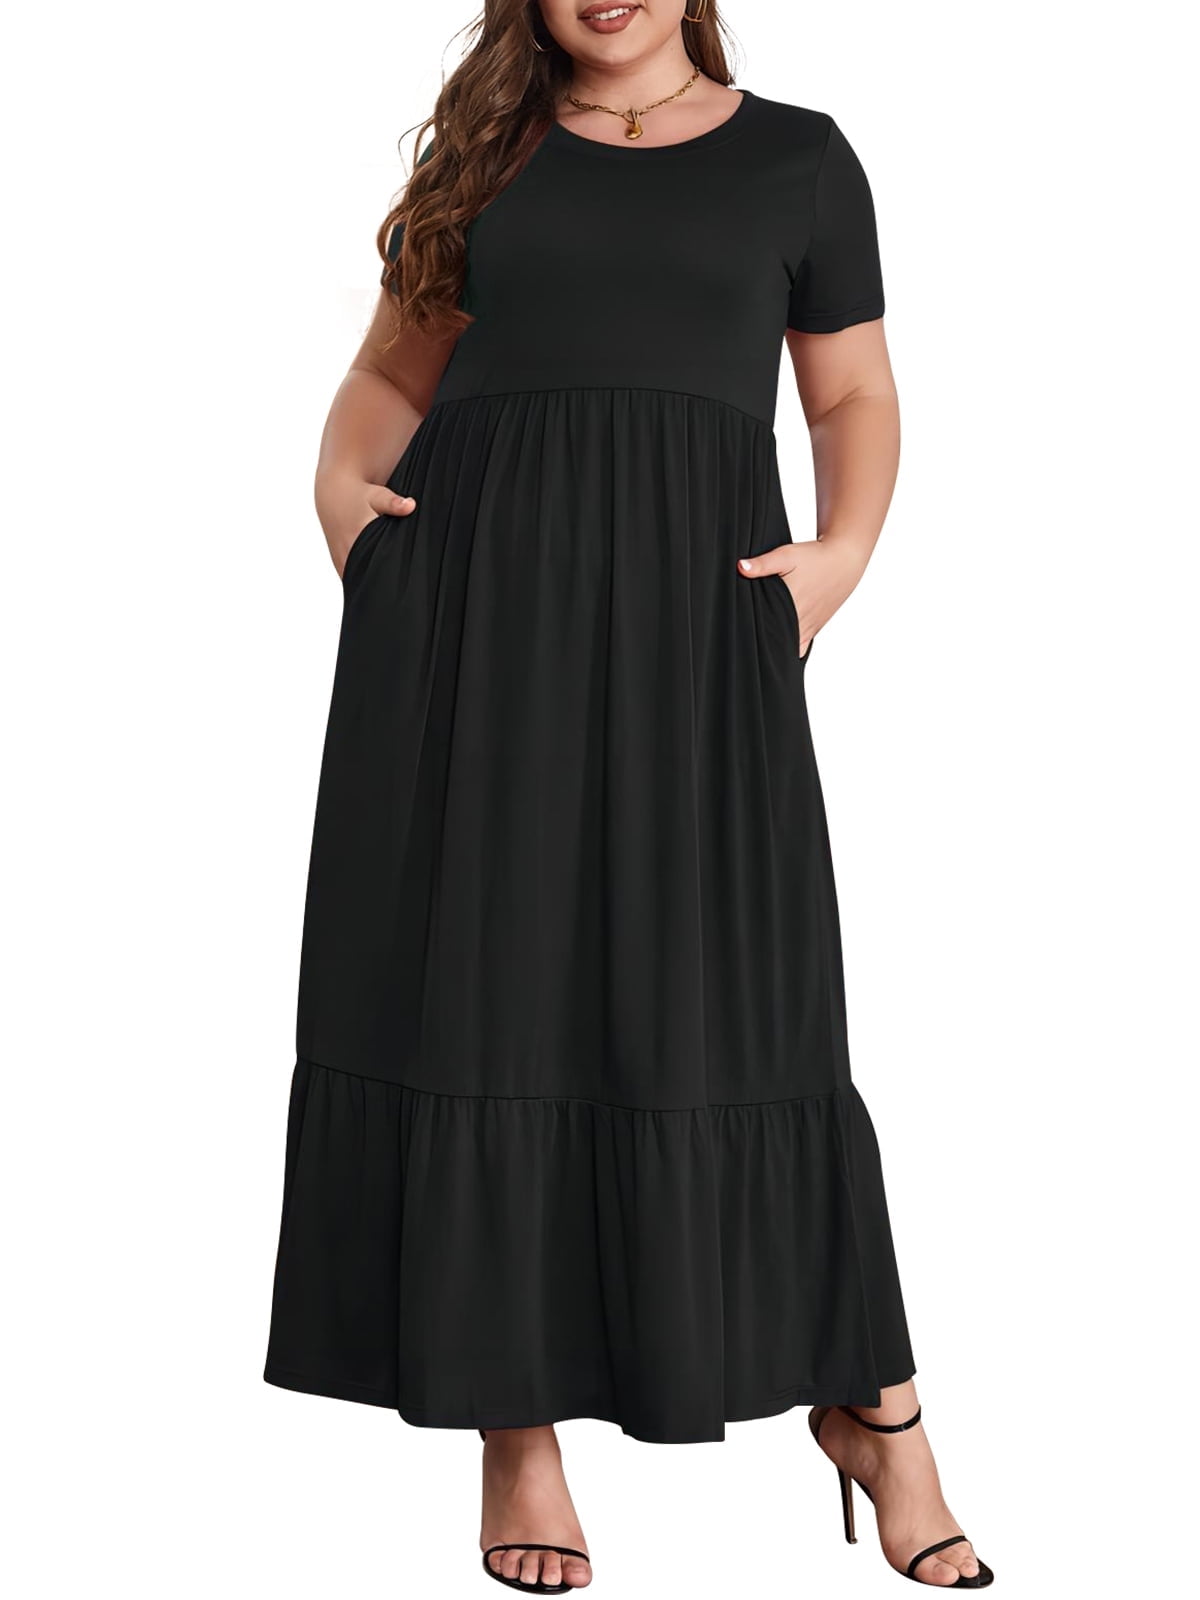 Plus Size Women Clothes::Appstore for Android